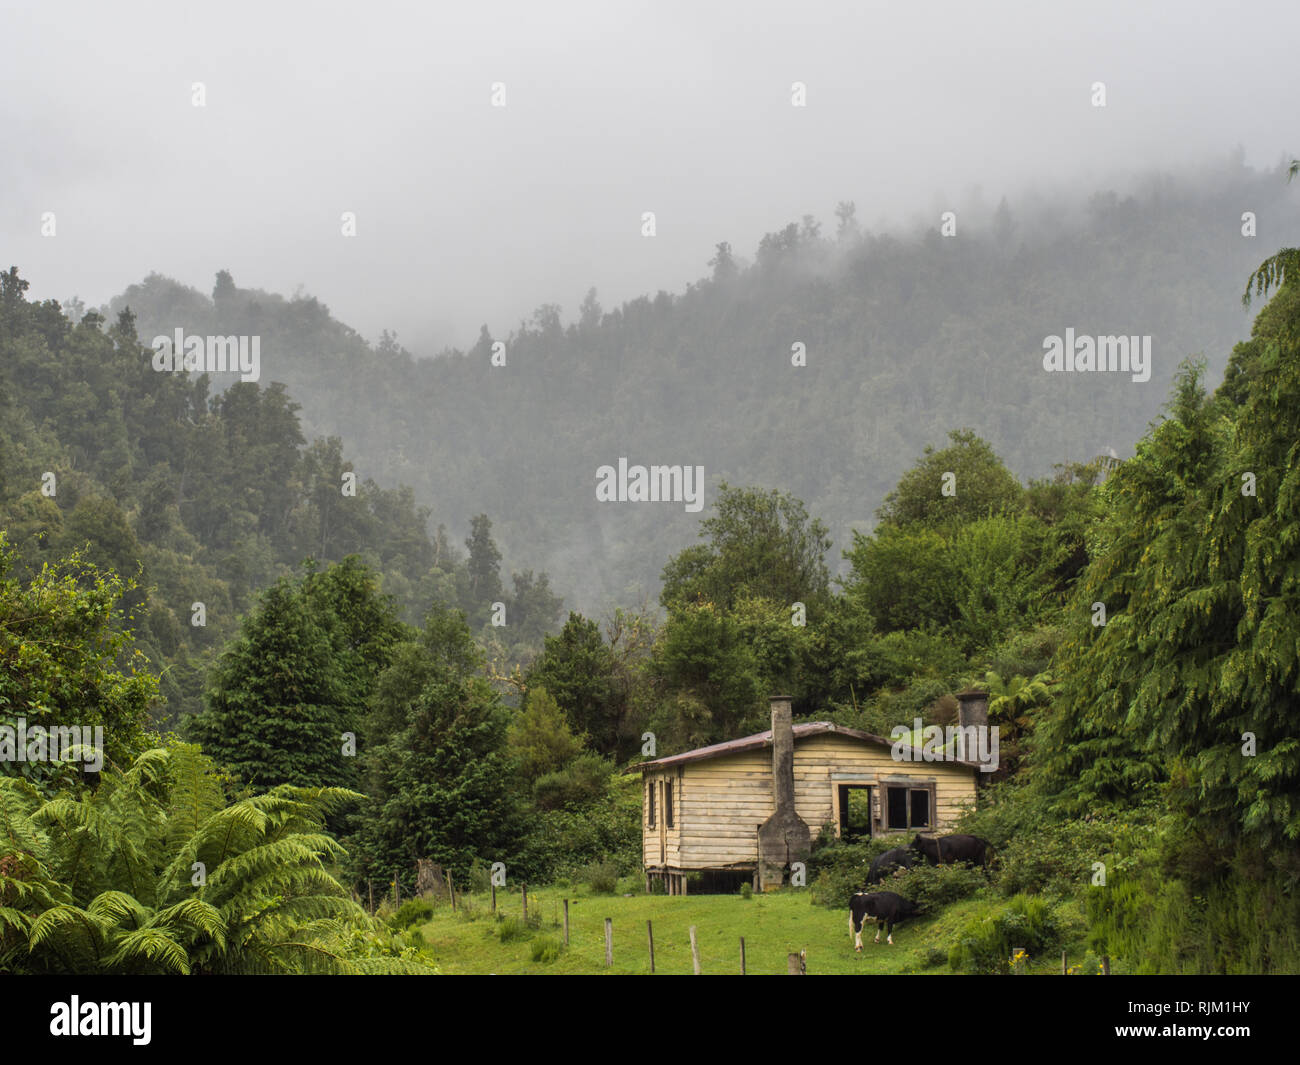 Cattle graze near an abandoned house among misty forest hills. Elsdon Best lived in a house at this site. Heipipi, Highway 38, Te Urewera, New Zealand Stock Photo